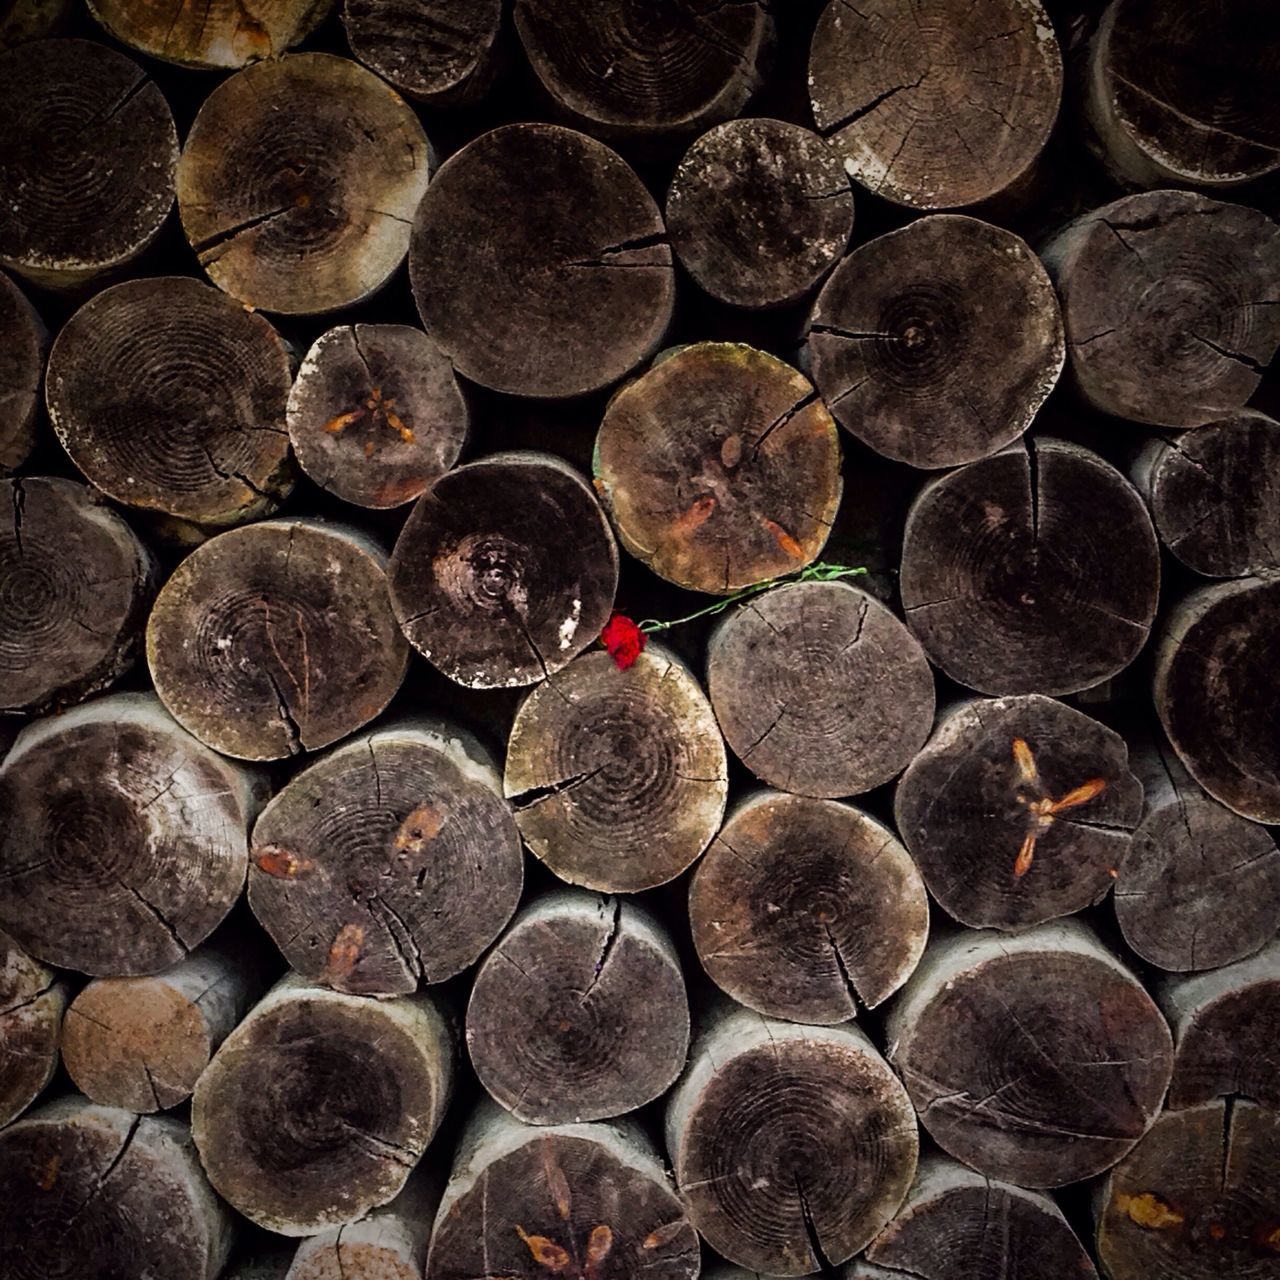 large group of objects, abundance, stack, backgrounds, firewood, full frame, stone - object, lumber industry, deforestation, log, pebble, heap, timber, textured, wood - material, arrangement, outdoors, no people, circle, pattern